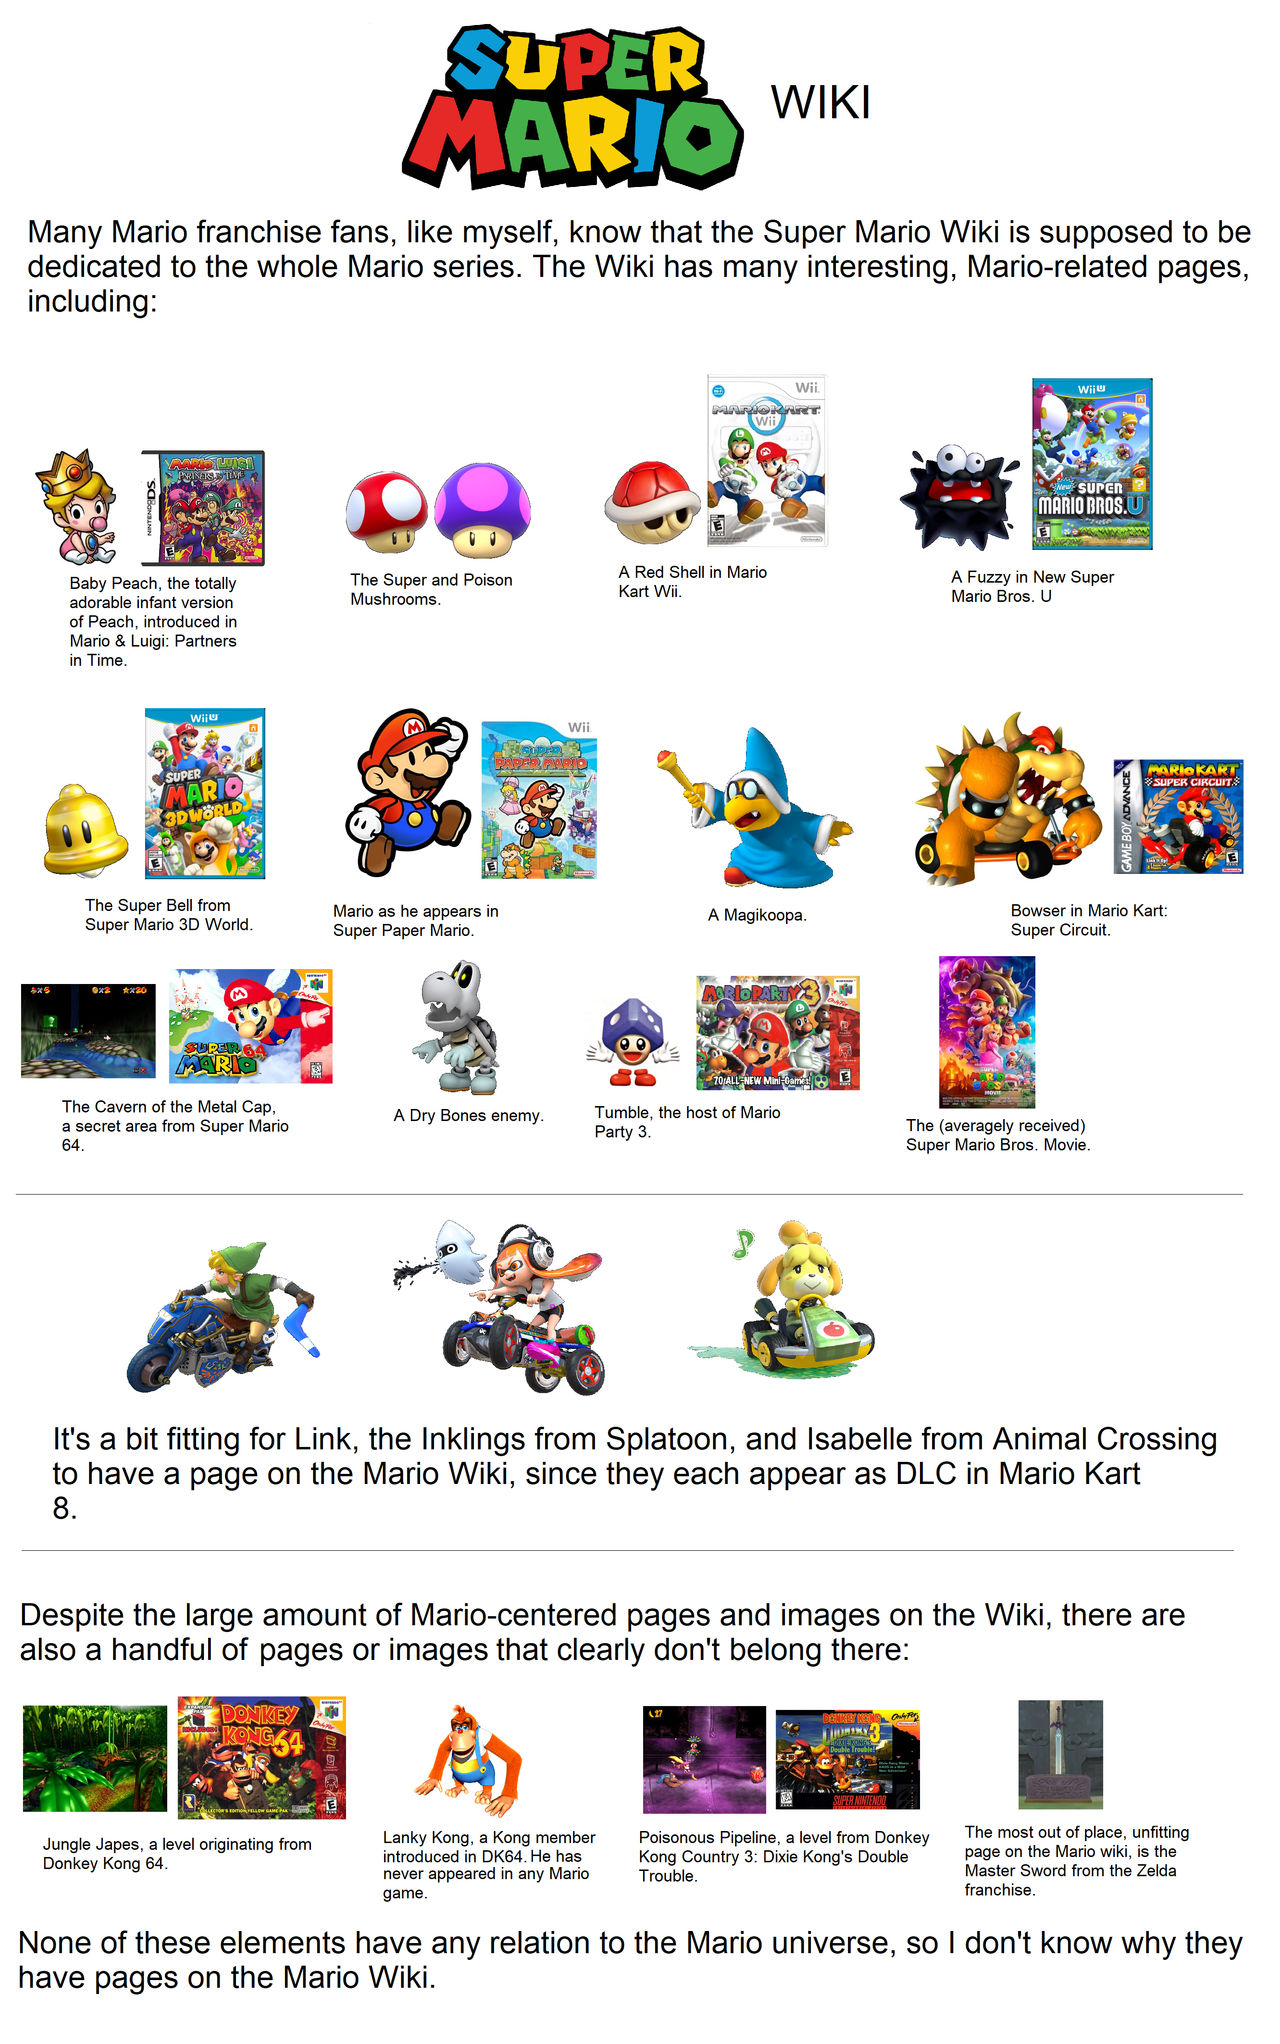 Super Mario Party Wiki – Everything You Need To Know About The Game